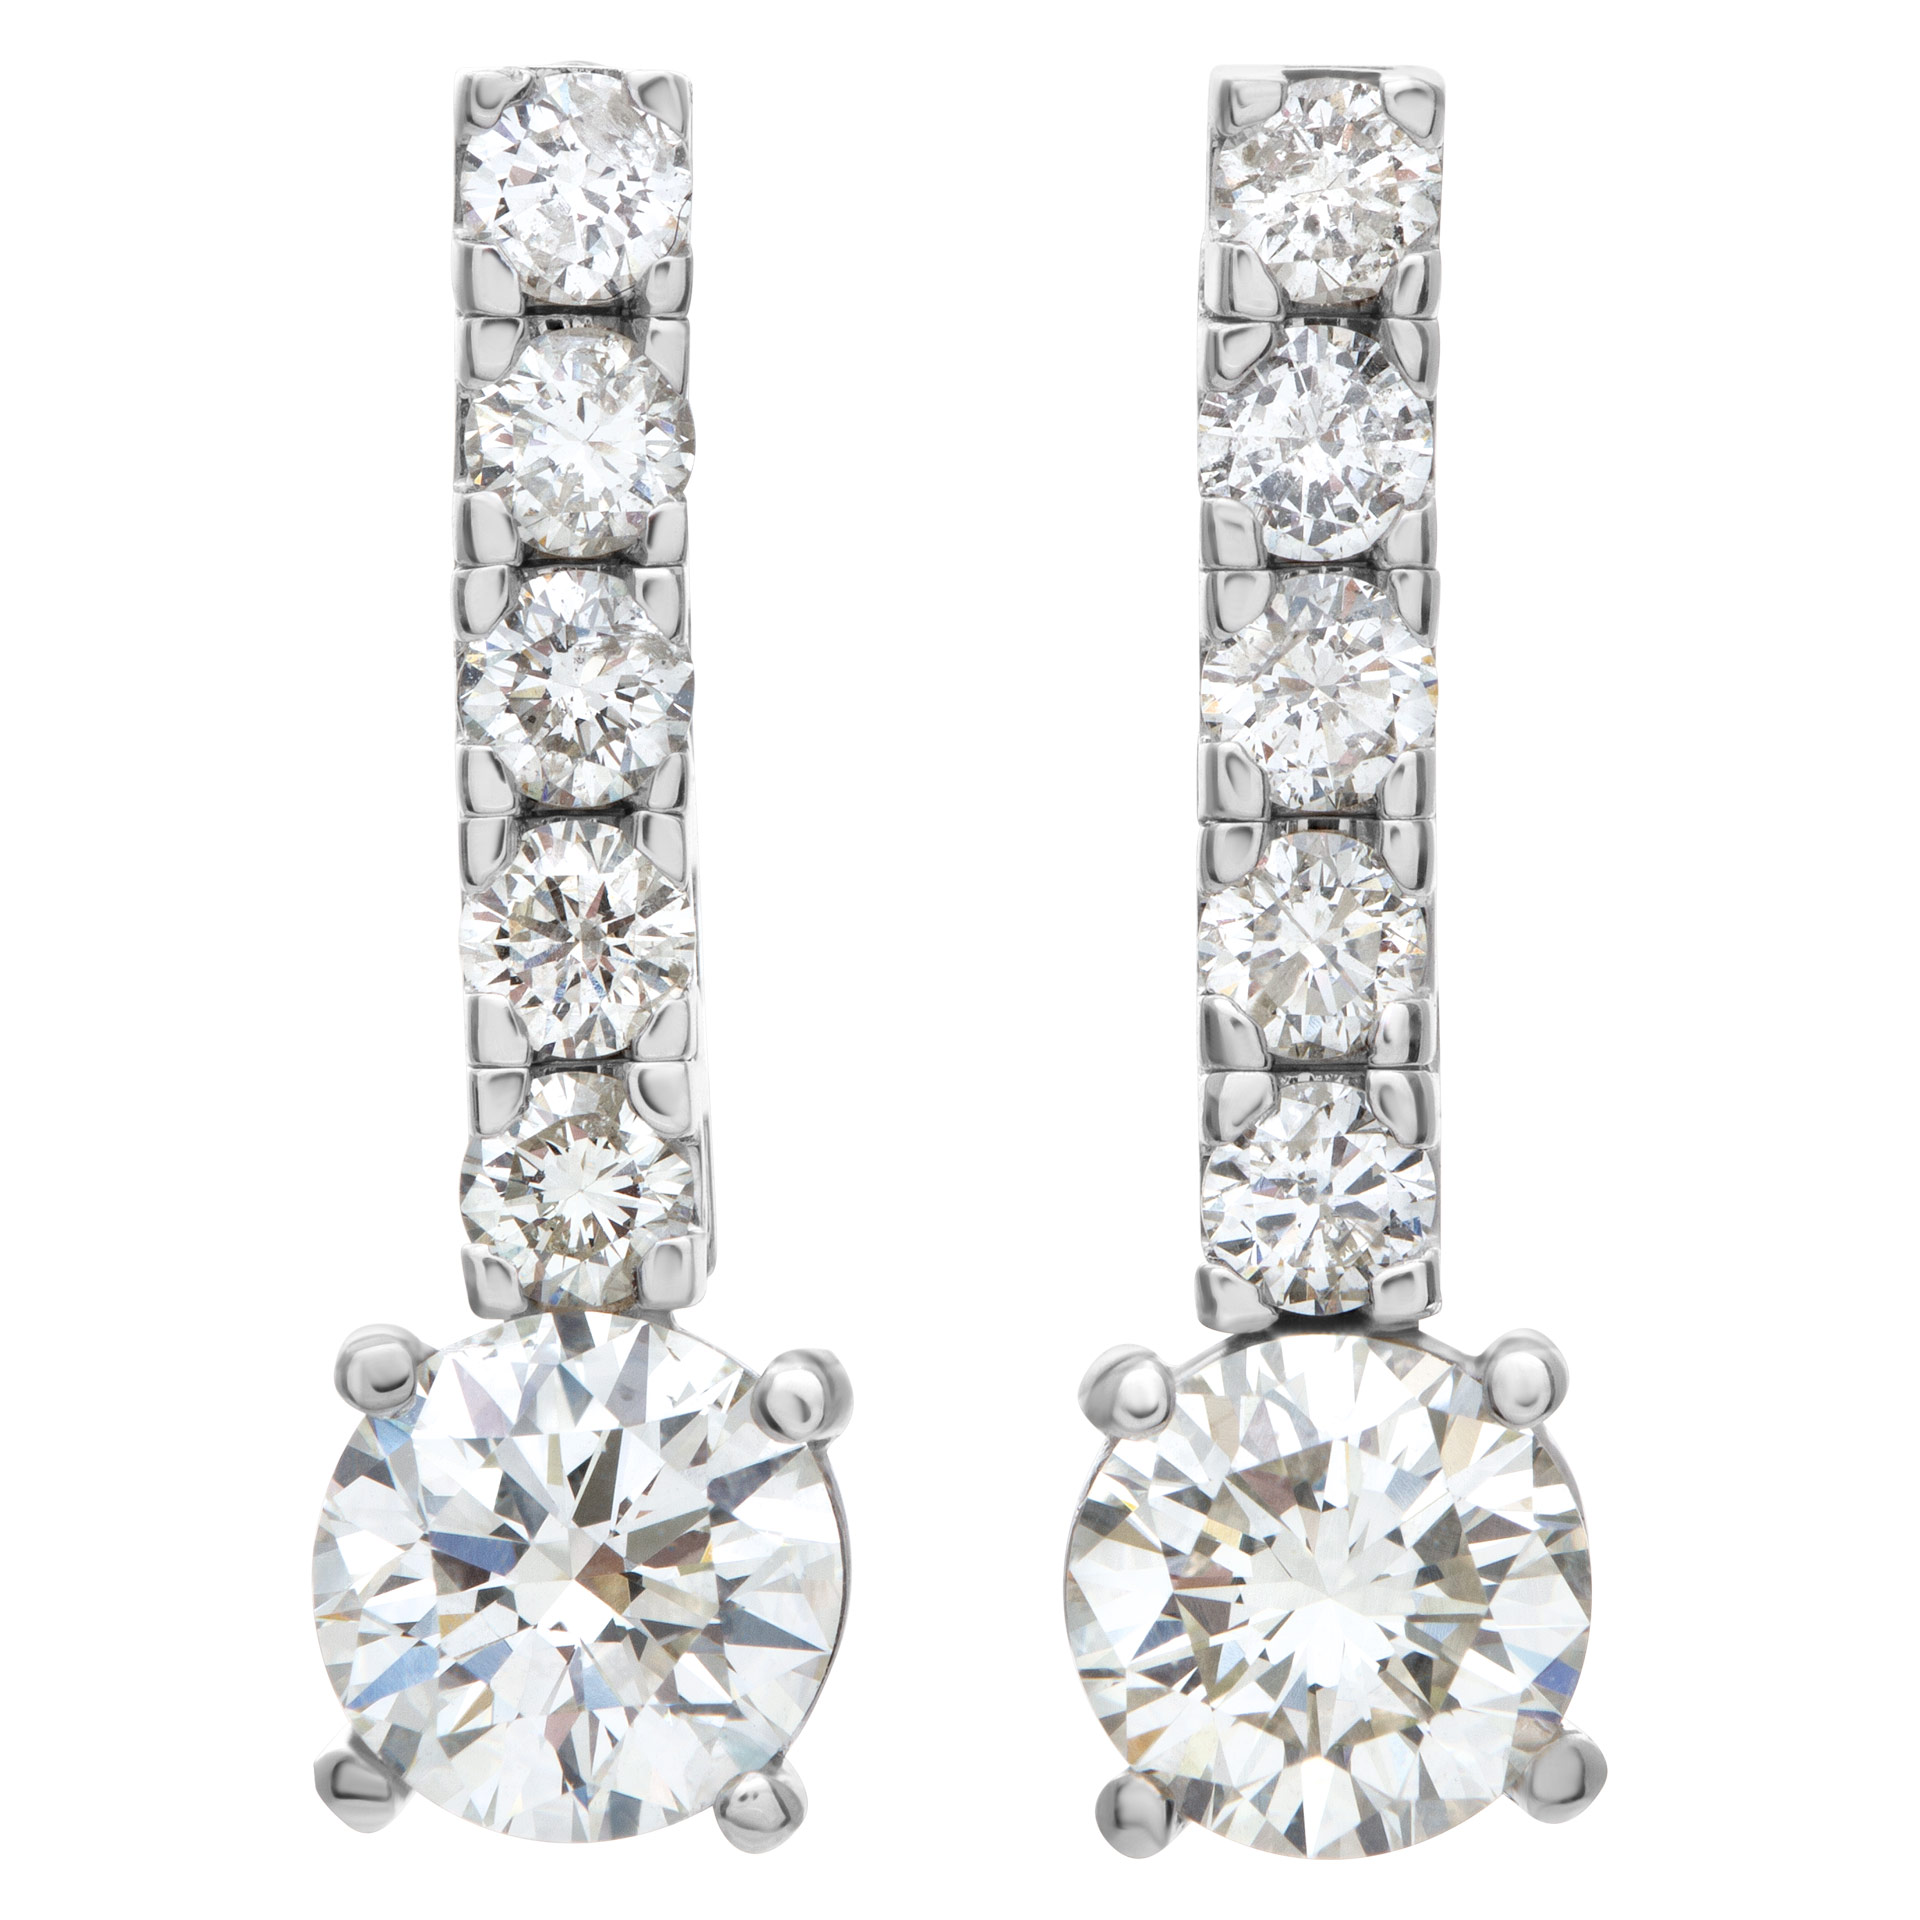 Line of diamond earrings. Approx. 1 carat each with additional 1 ct in line.